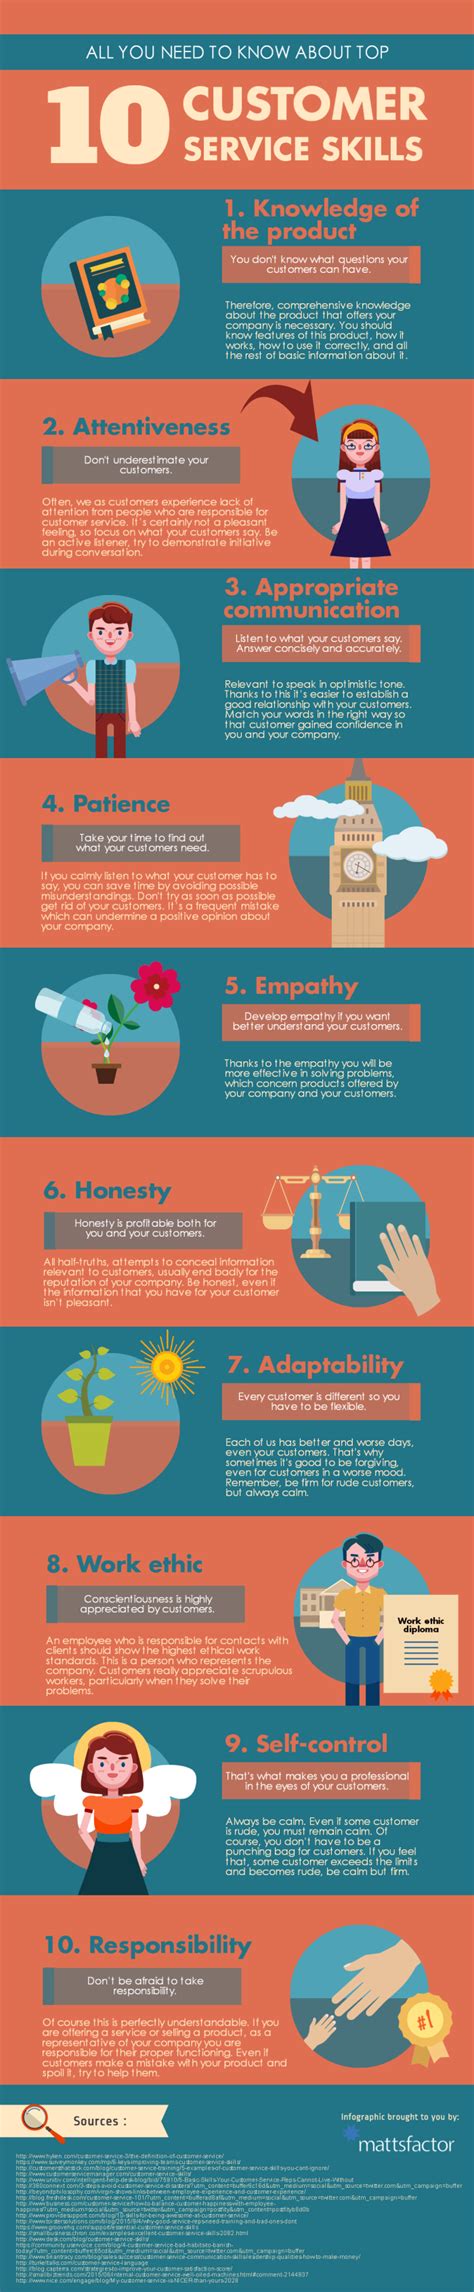 Understanding customers' needs is another essential skill for customer service reps. All You Need To Know About Top 10 Customer Service Skills ...